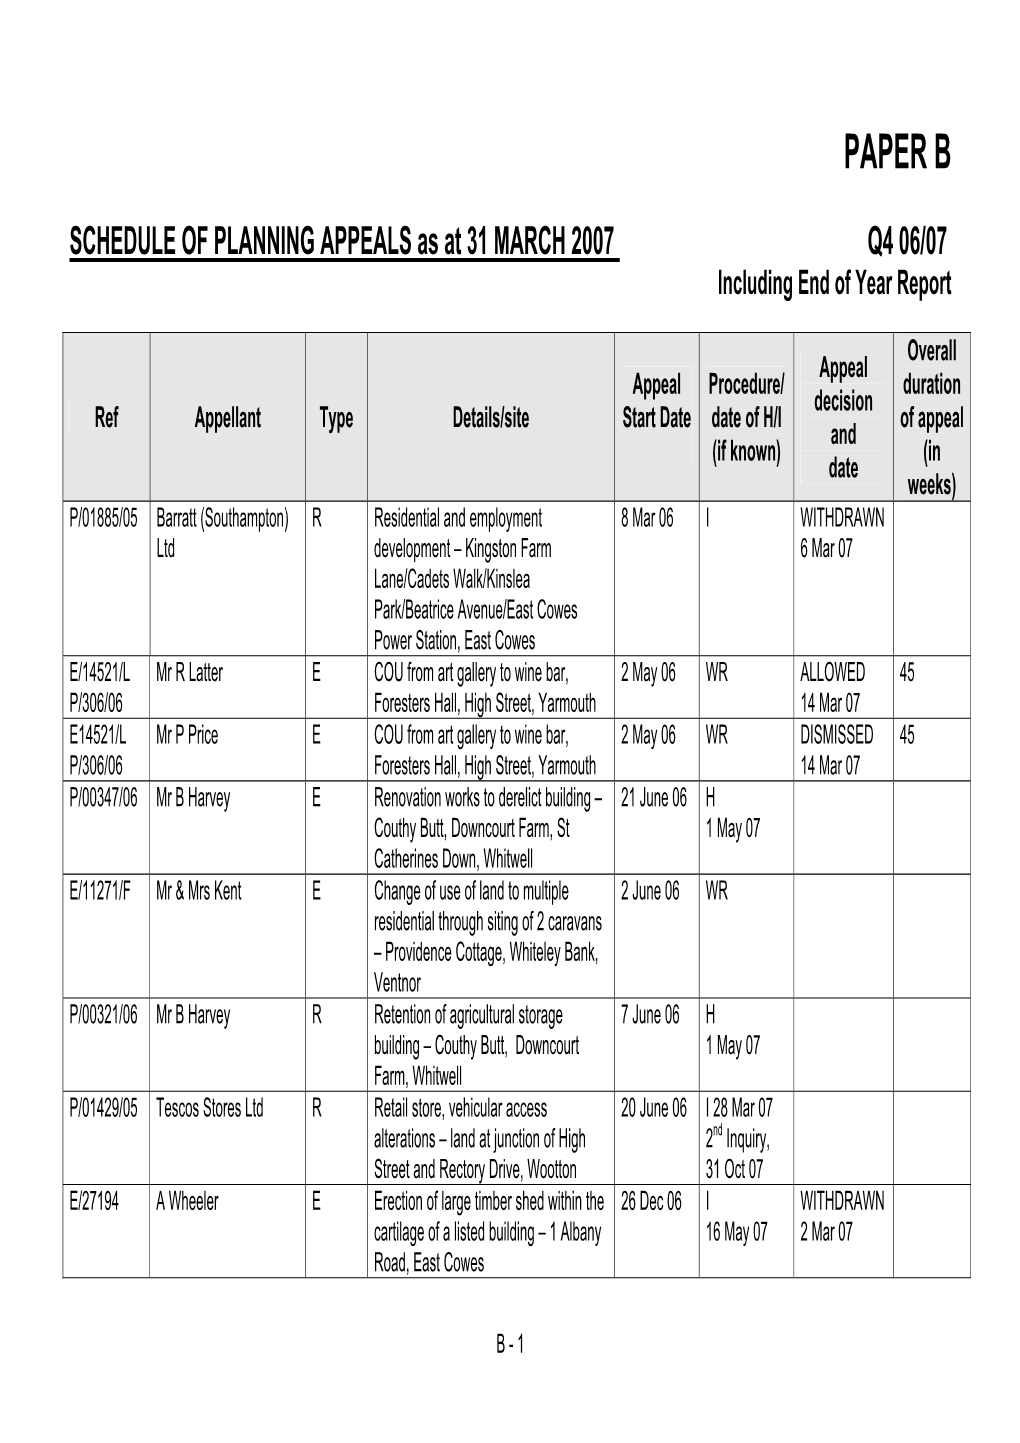 SCHEDULE of PLANNING APPEALS at 31 DECEMBER 2005